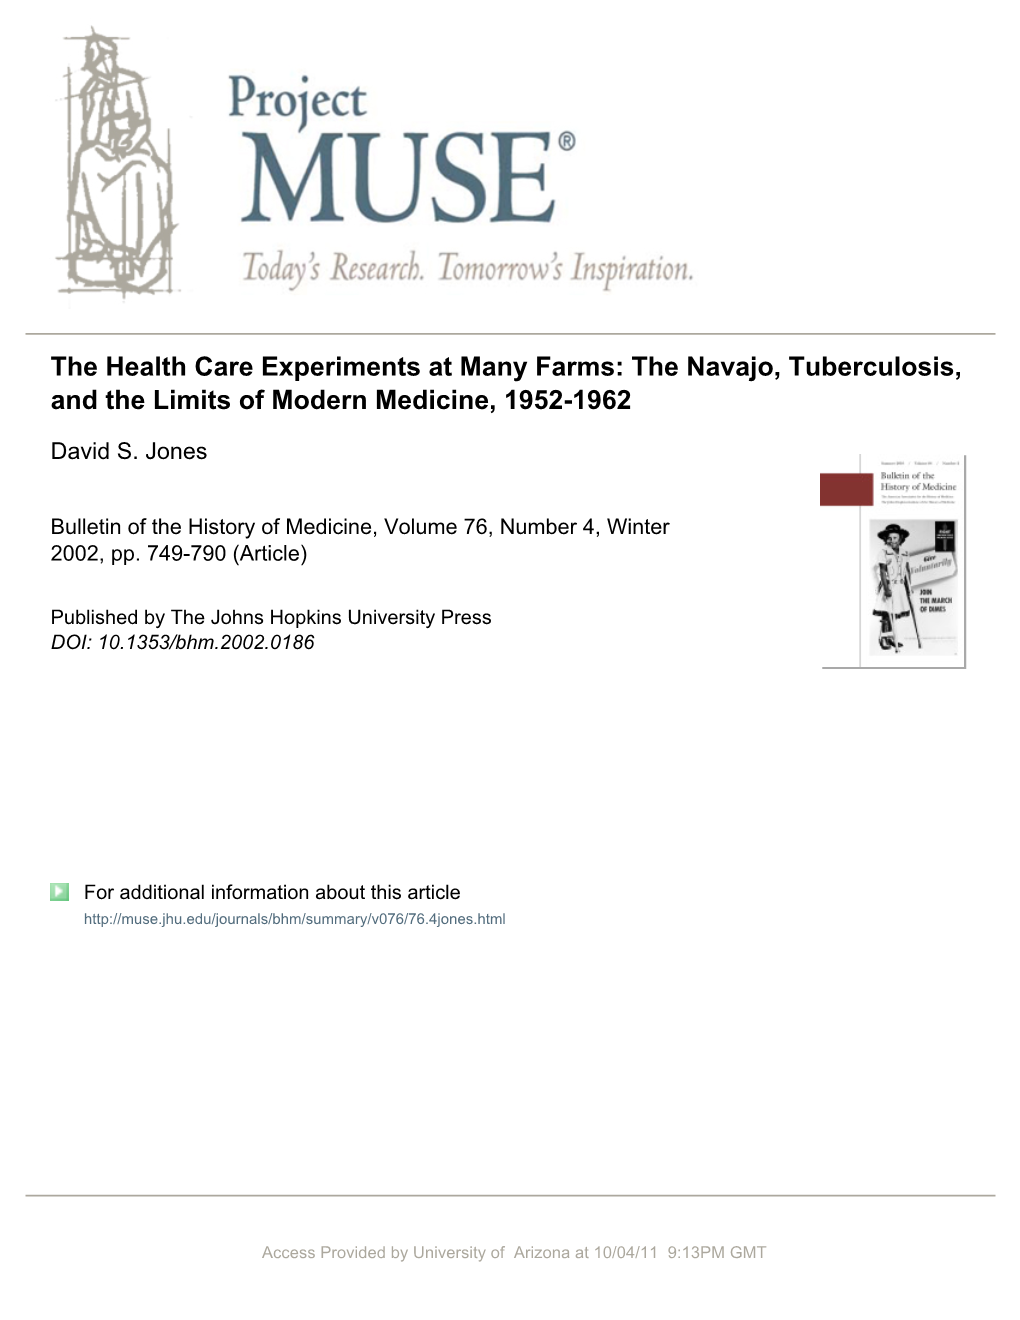 The Health Care Experiments at Many Farms: the Navajo, Tuberculosis, and the Limits of Modern Medicine, 1952-1962